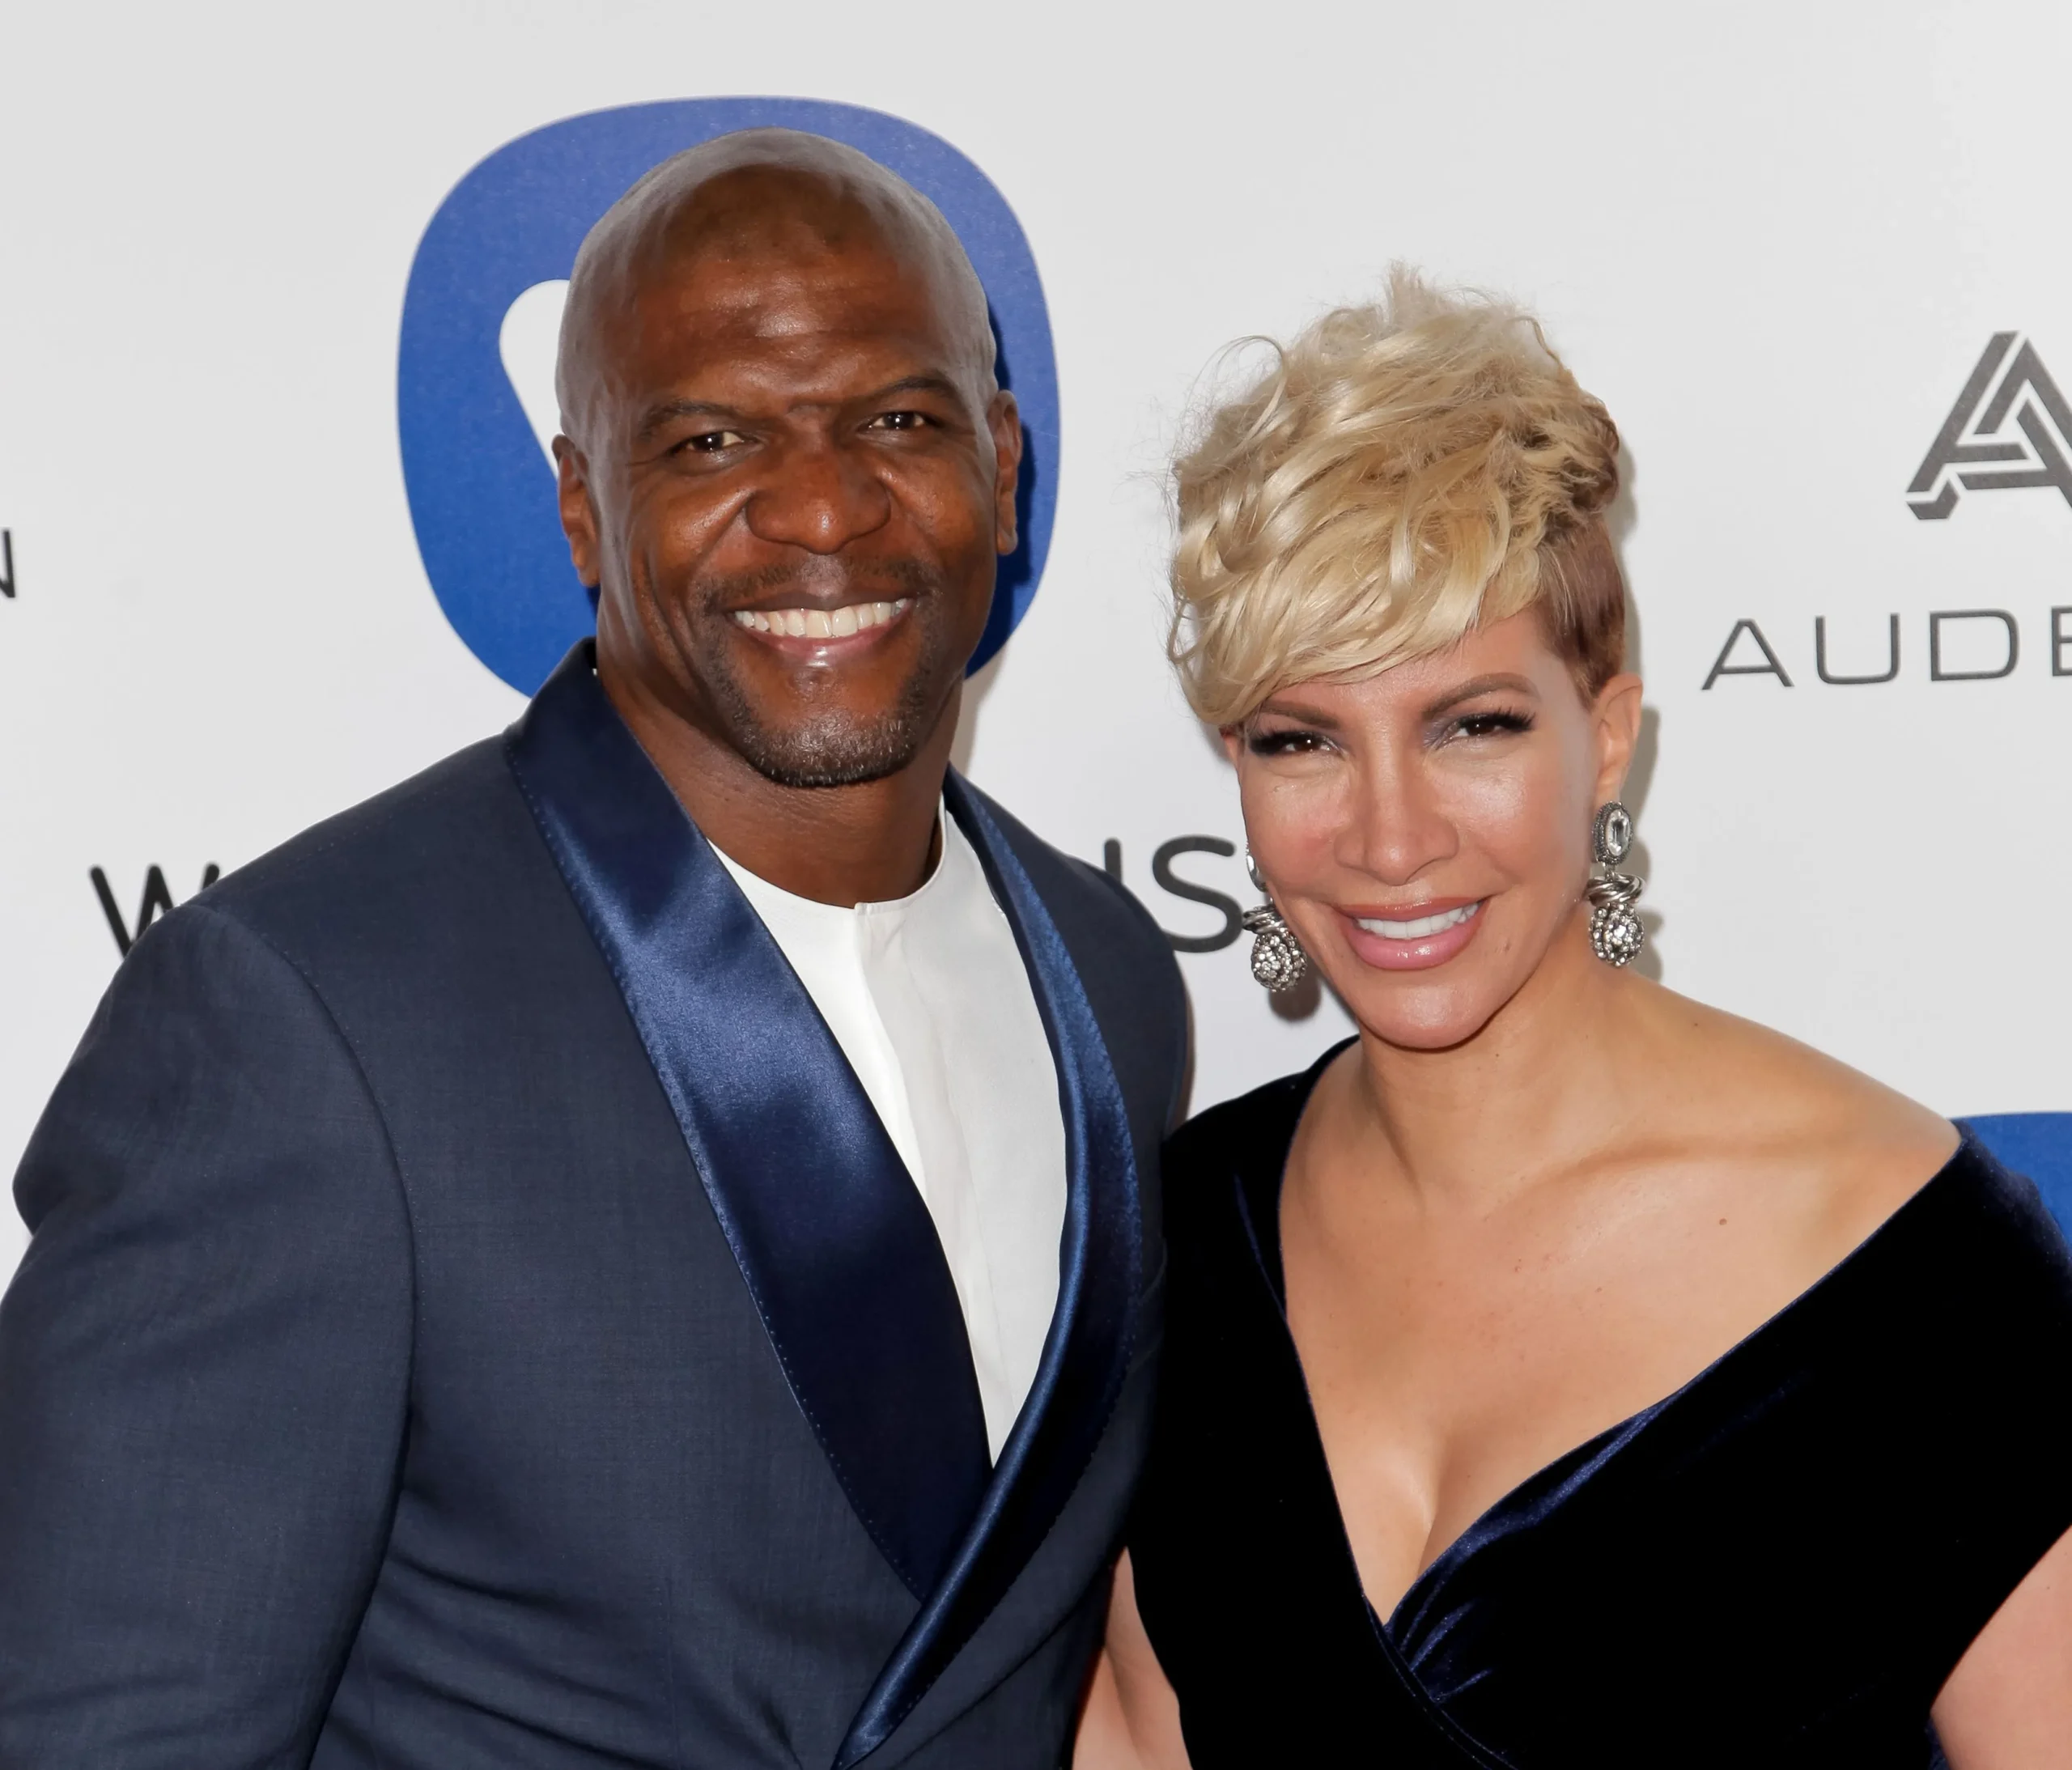 Terry Crews Addresses People Questioning His Wife’s Racial Identity: ‘She Was Raised in Black Culture’ [Video]